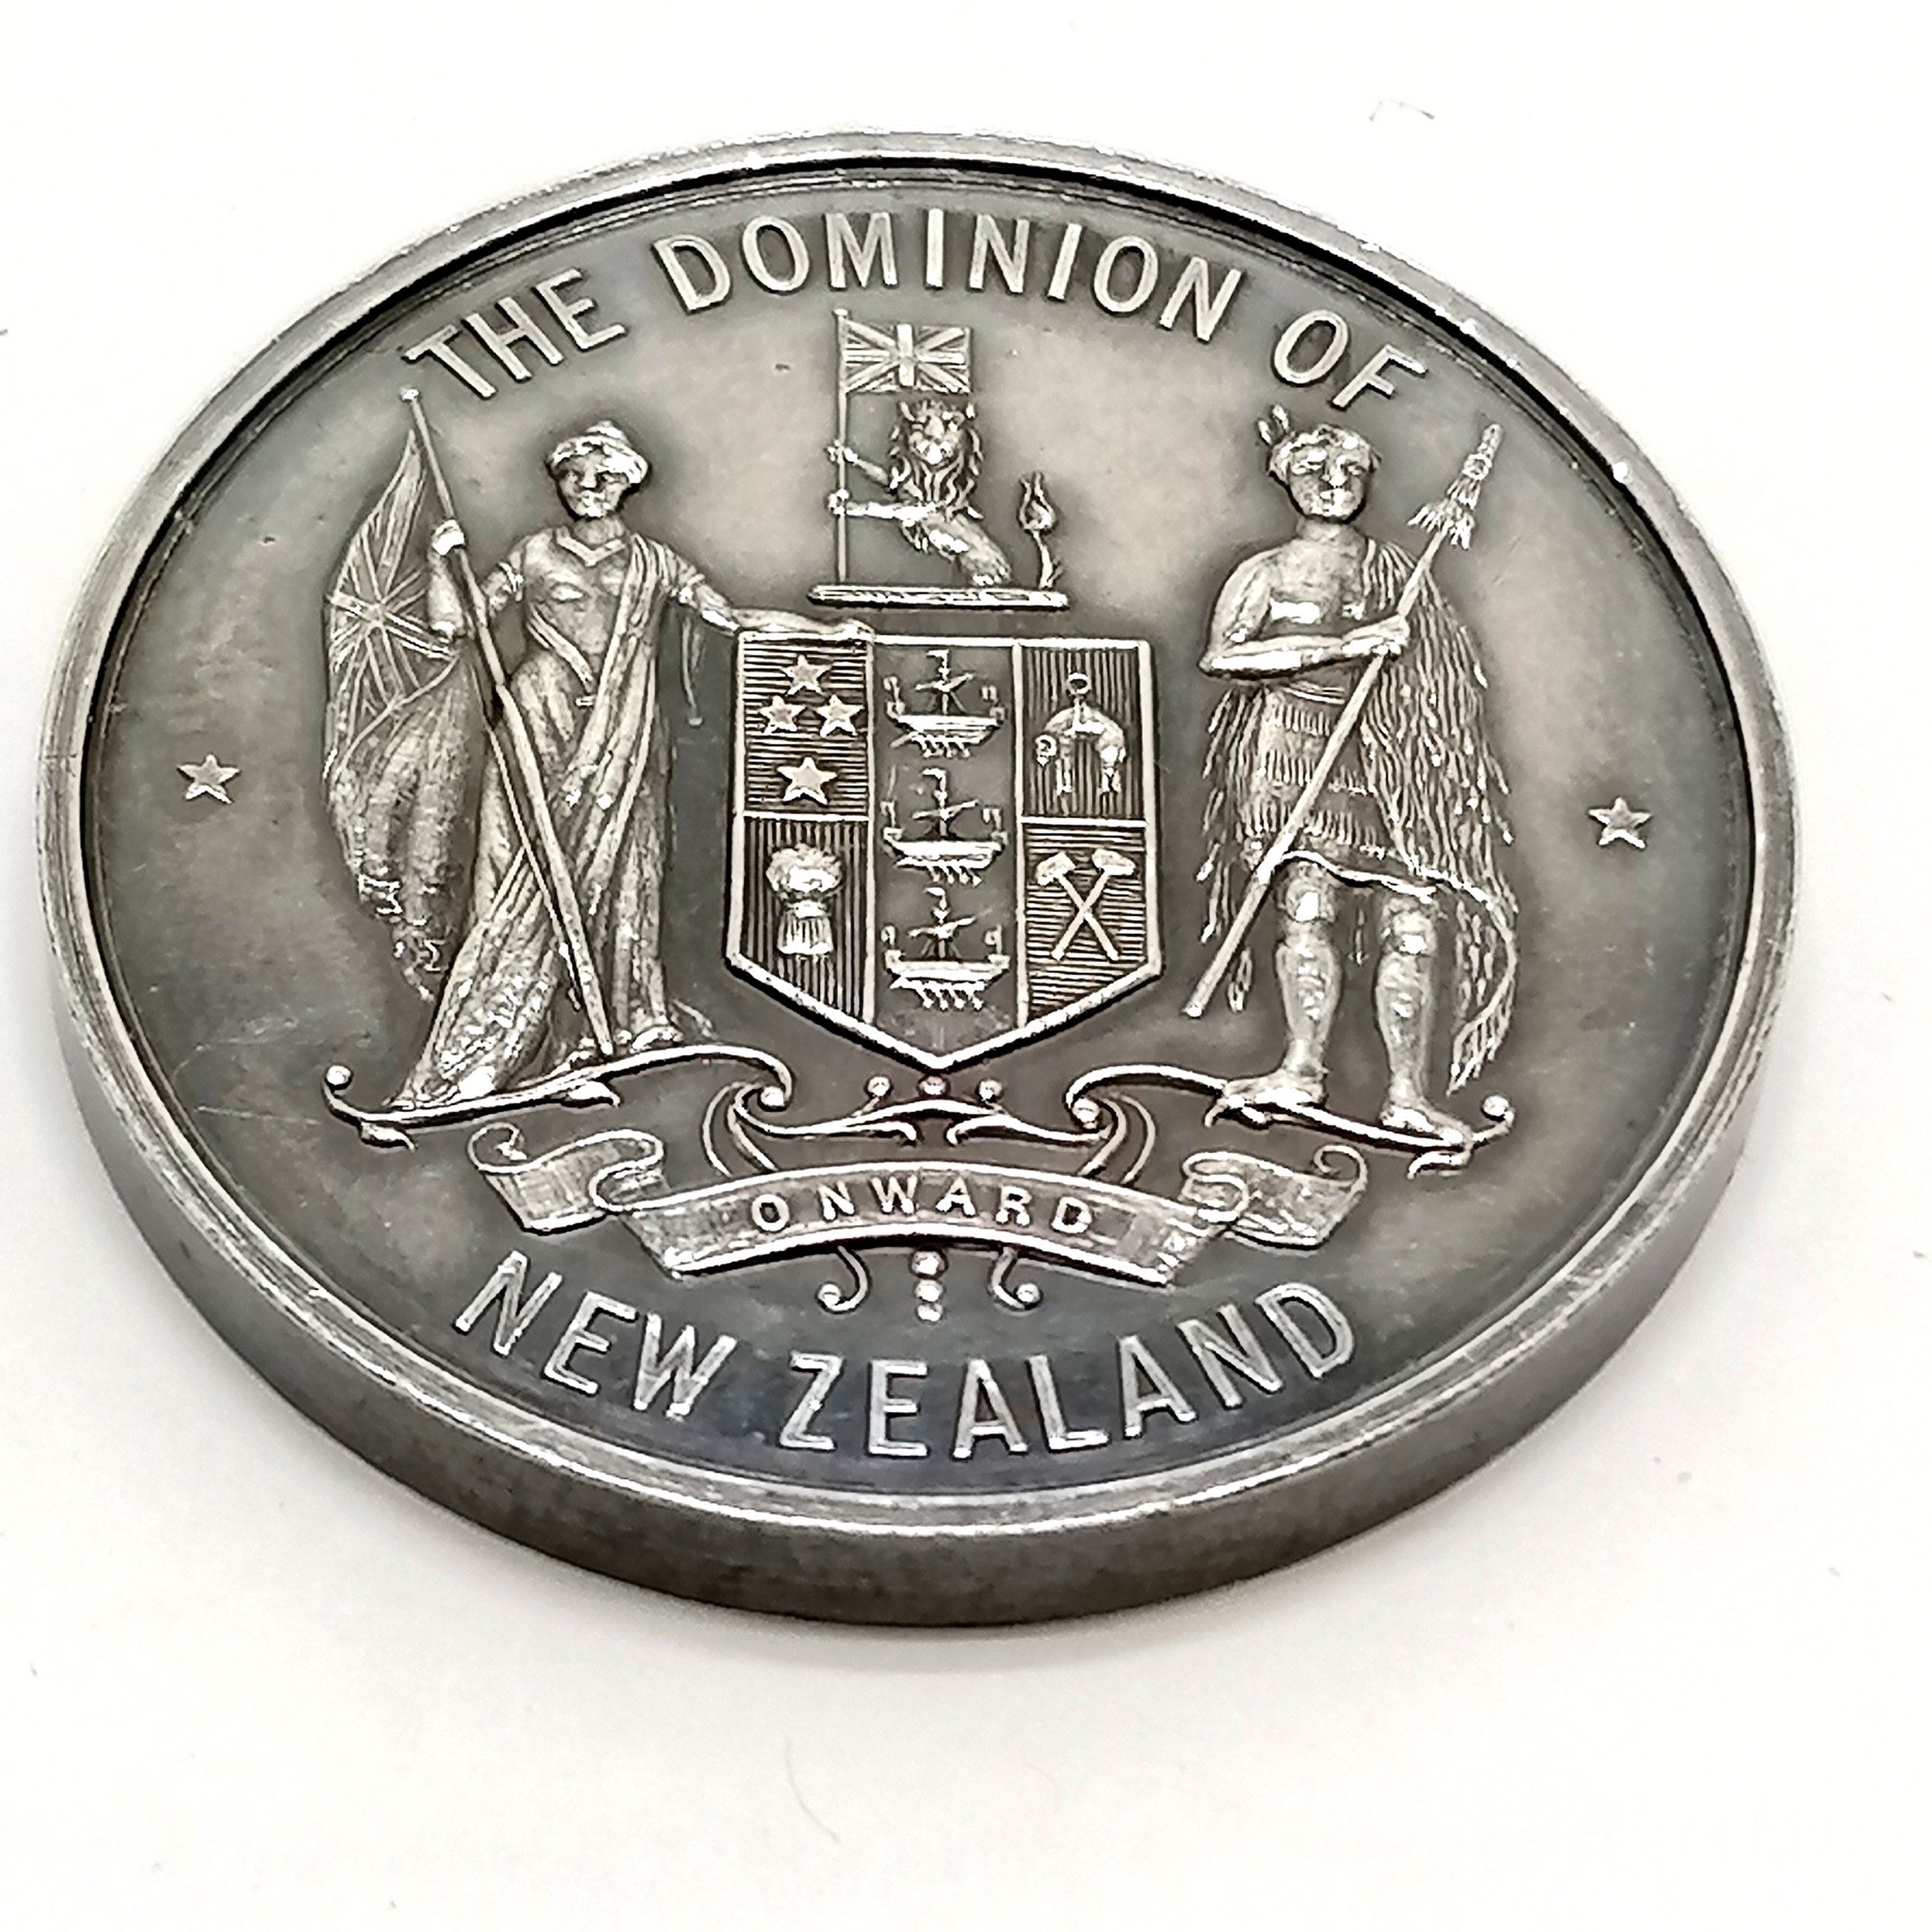 1913 New Zealand medal awarded to the officers and crew of HMS New Zealand during the - Image 2 of 2